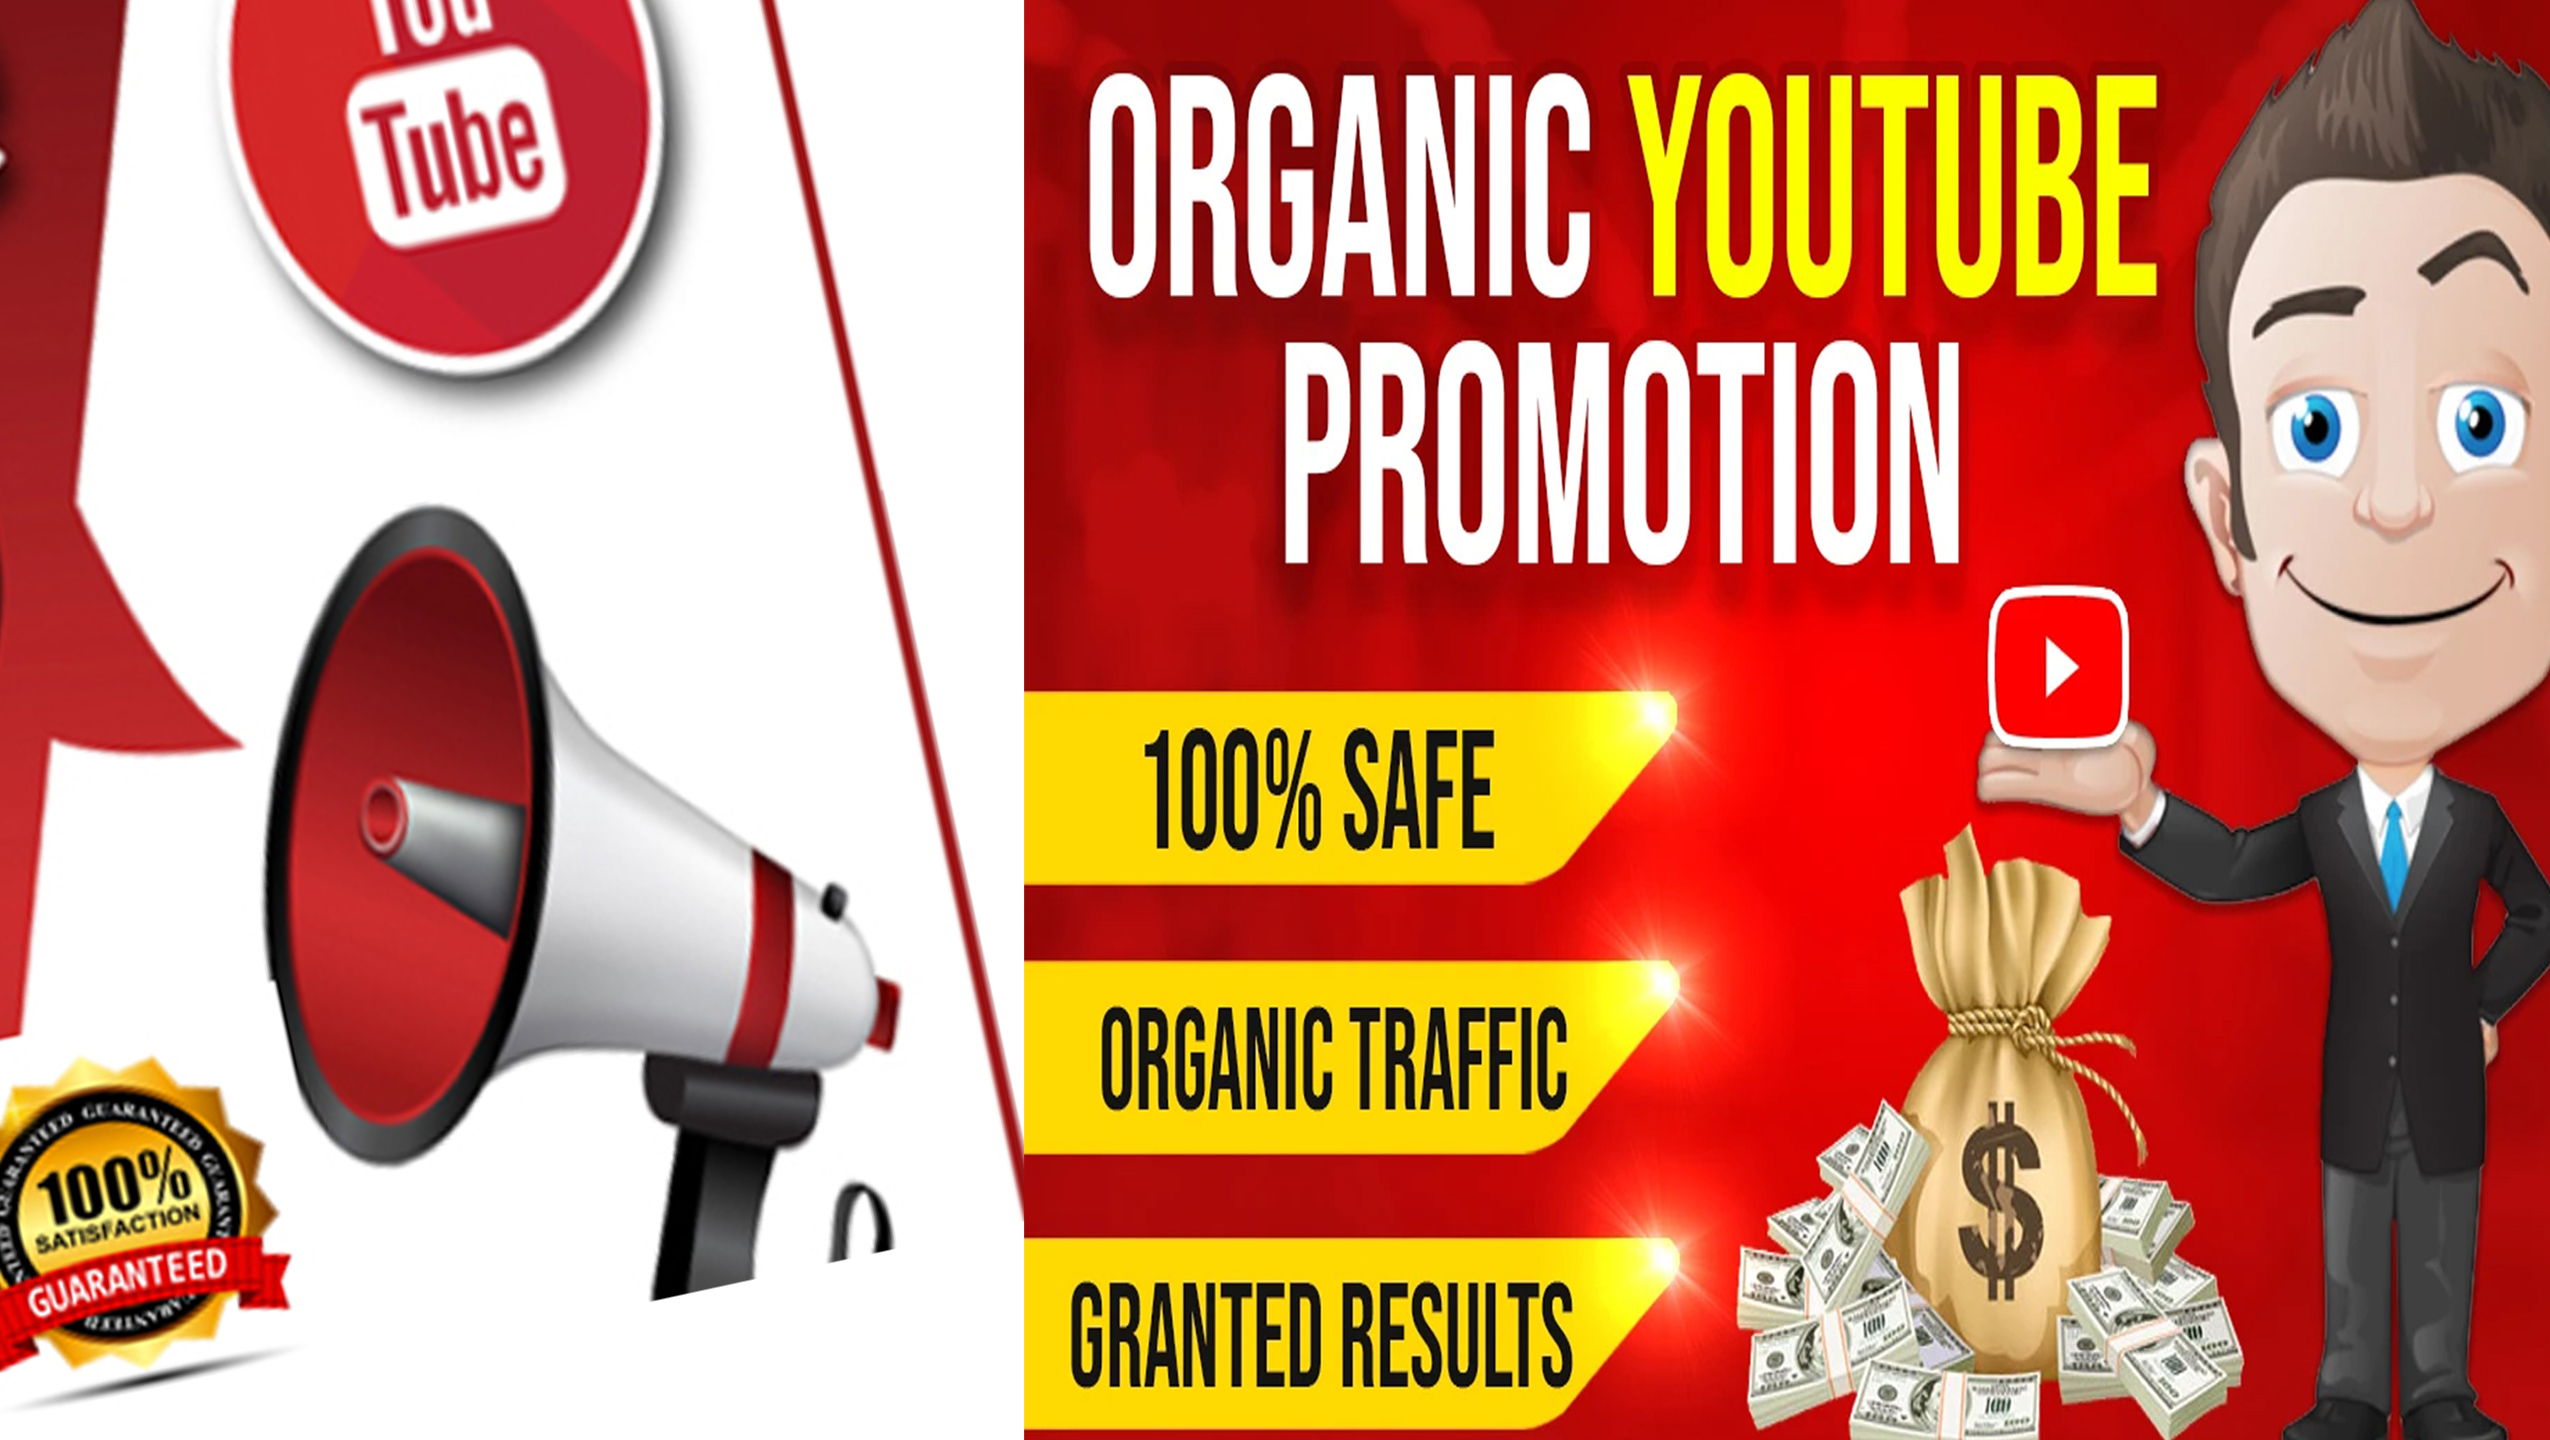 ALL IN ONE PACKAGE FOR YOUTUBE VIDEO AND CHANEL PROMOTION VIA REAL AUDIENCE 